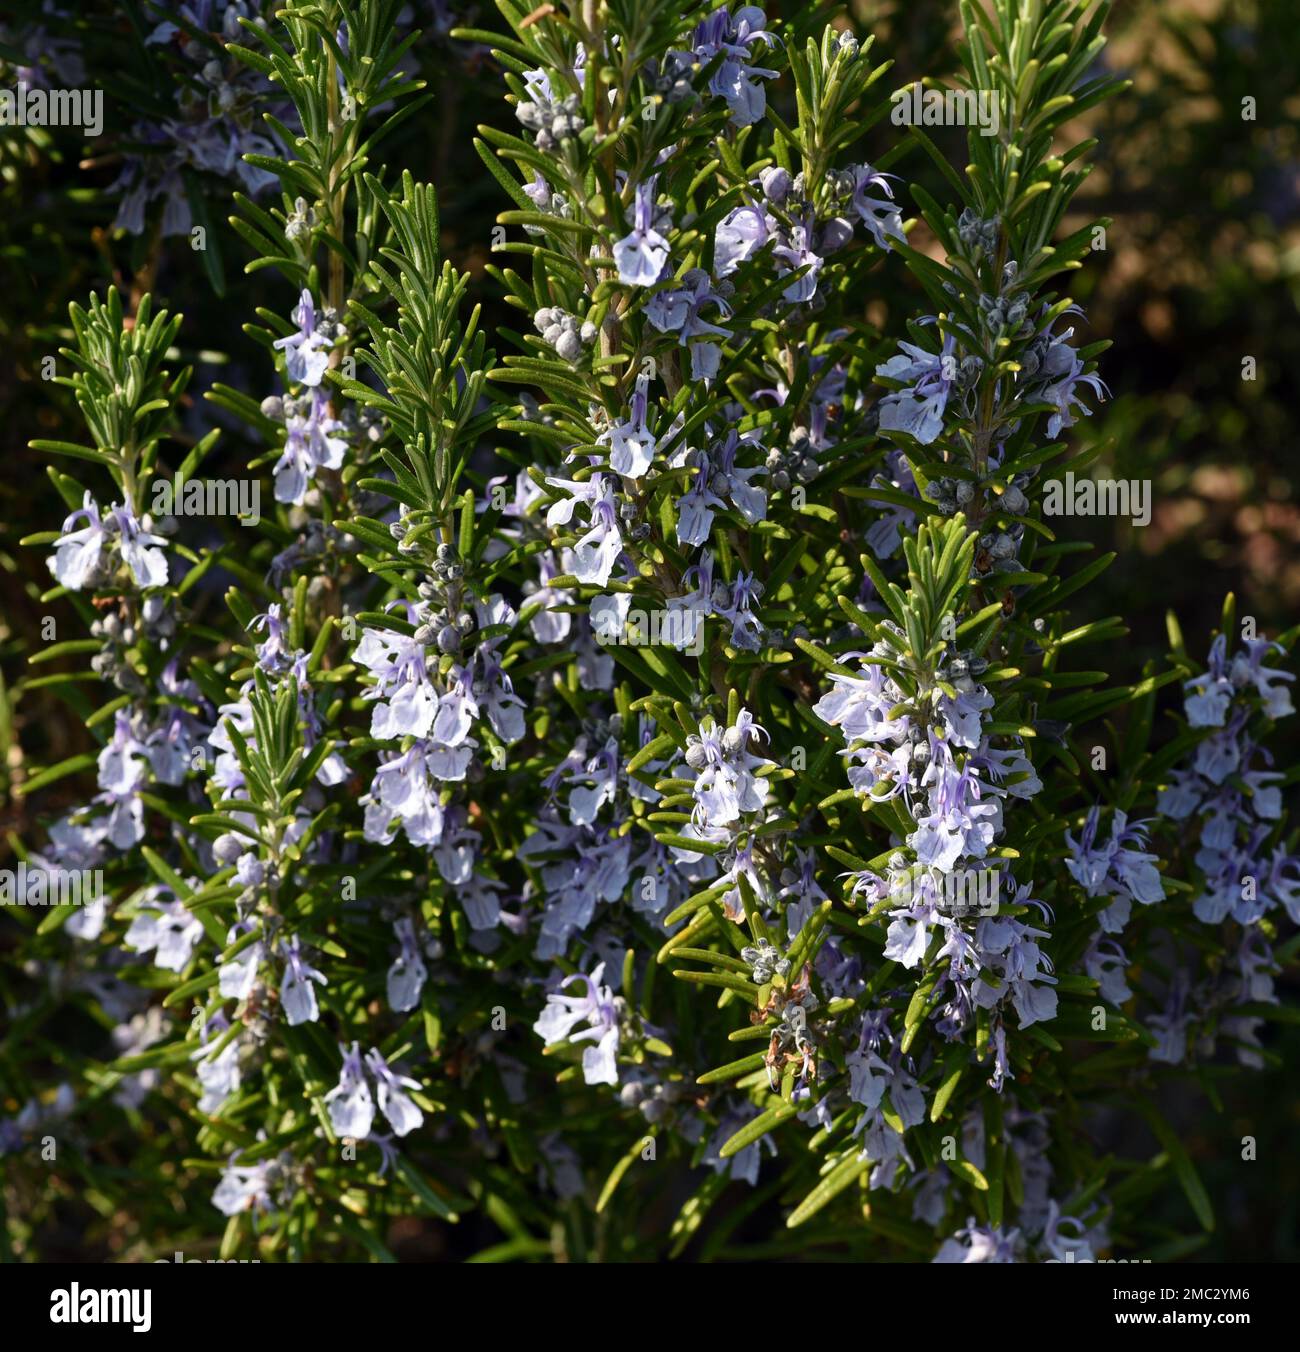 Rosmarin, Rosemary officinalis, ist eine Heil- und Kraeuterpflanze. Rosemary officinalis, is a medicinal and herbal plant. Stock Photo